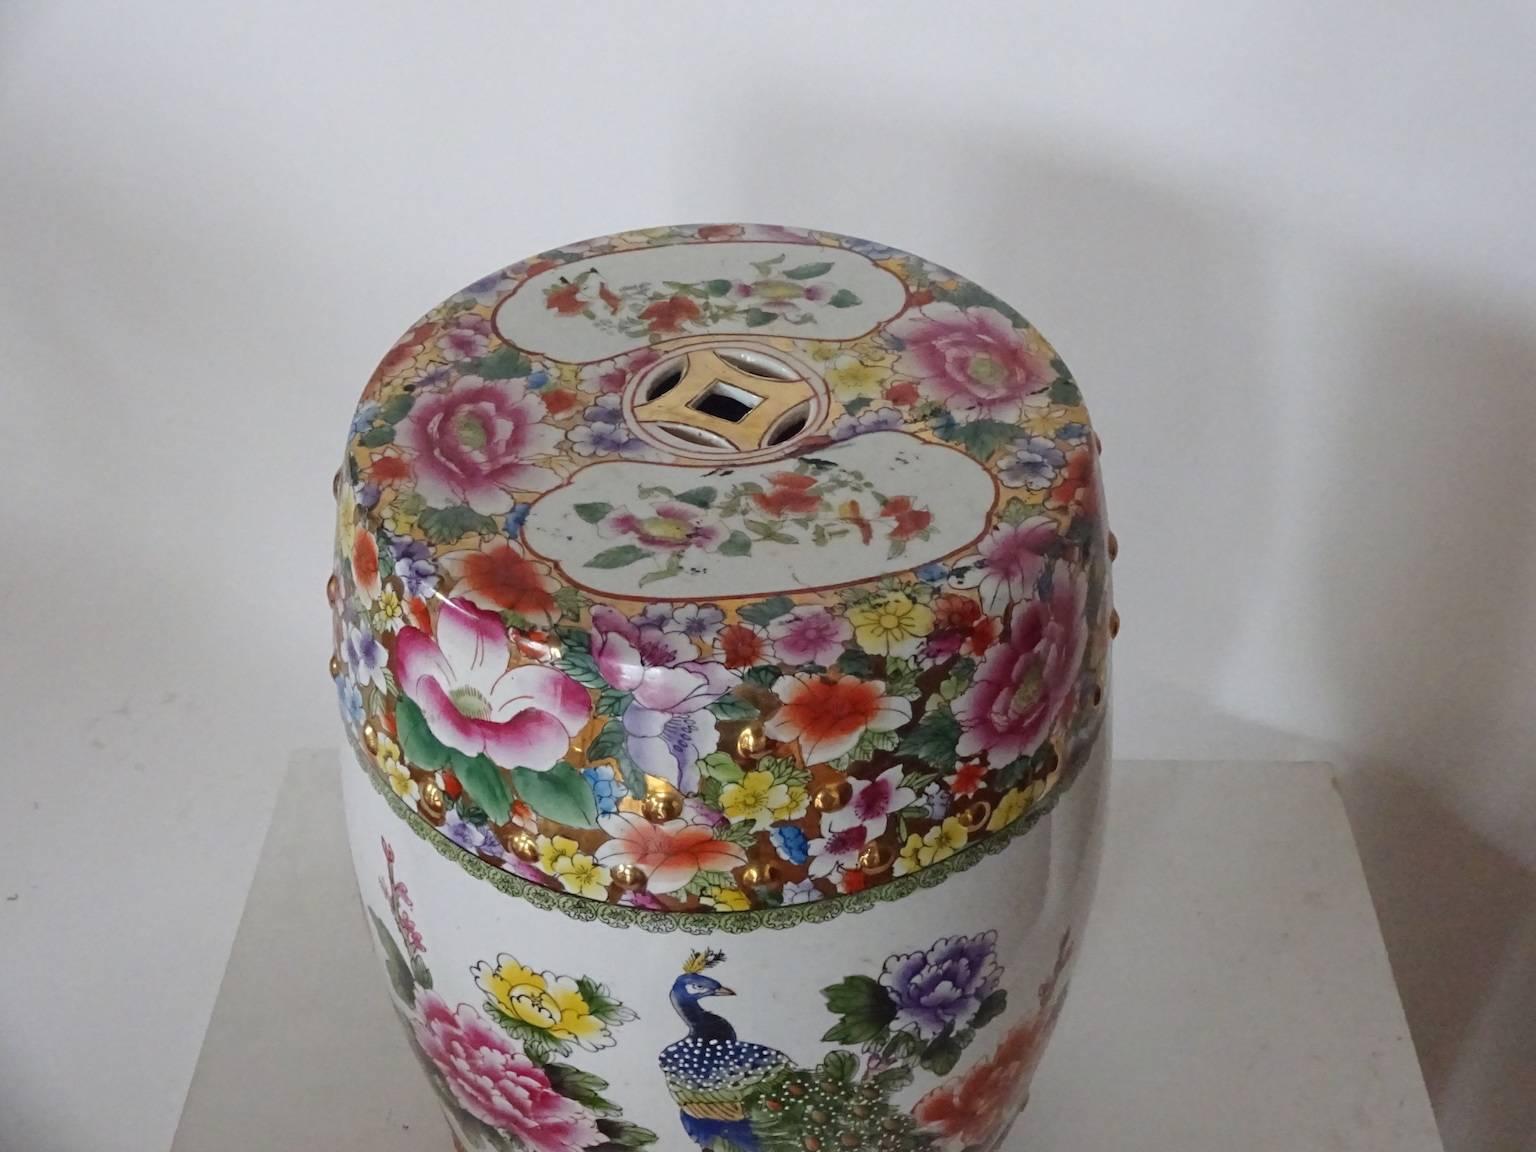 Peacock and peonies adorn this colorful Chinese barrel-form porcelain garden seat with lucky coin cutouts on the top and sides. Pinks, blues, yellows and greens stand out against the white ground. Hand-painted. Ideal for garden or porch or any